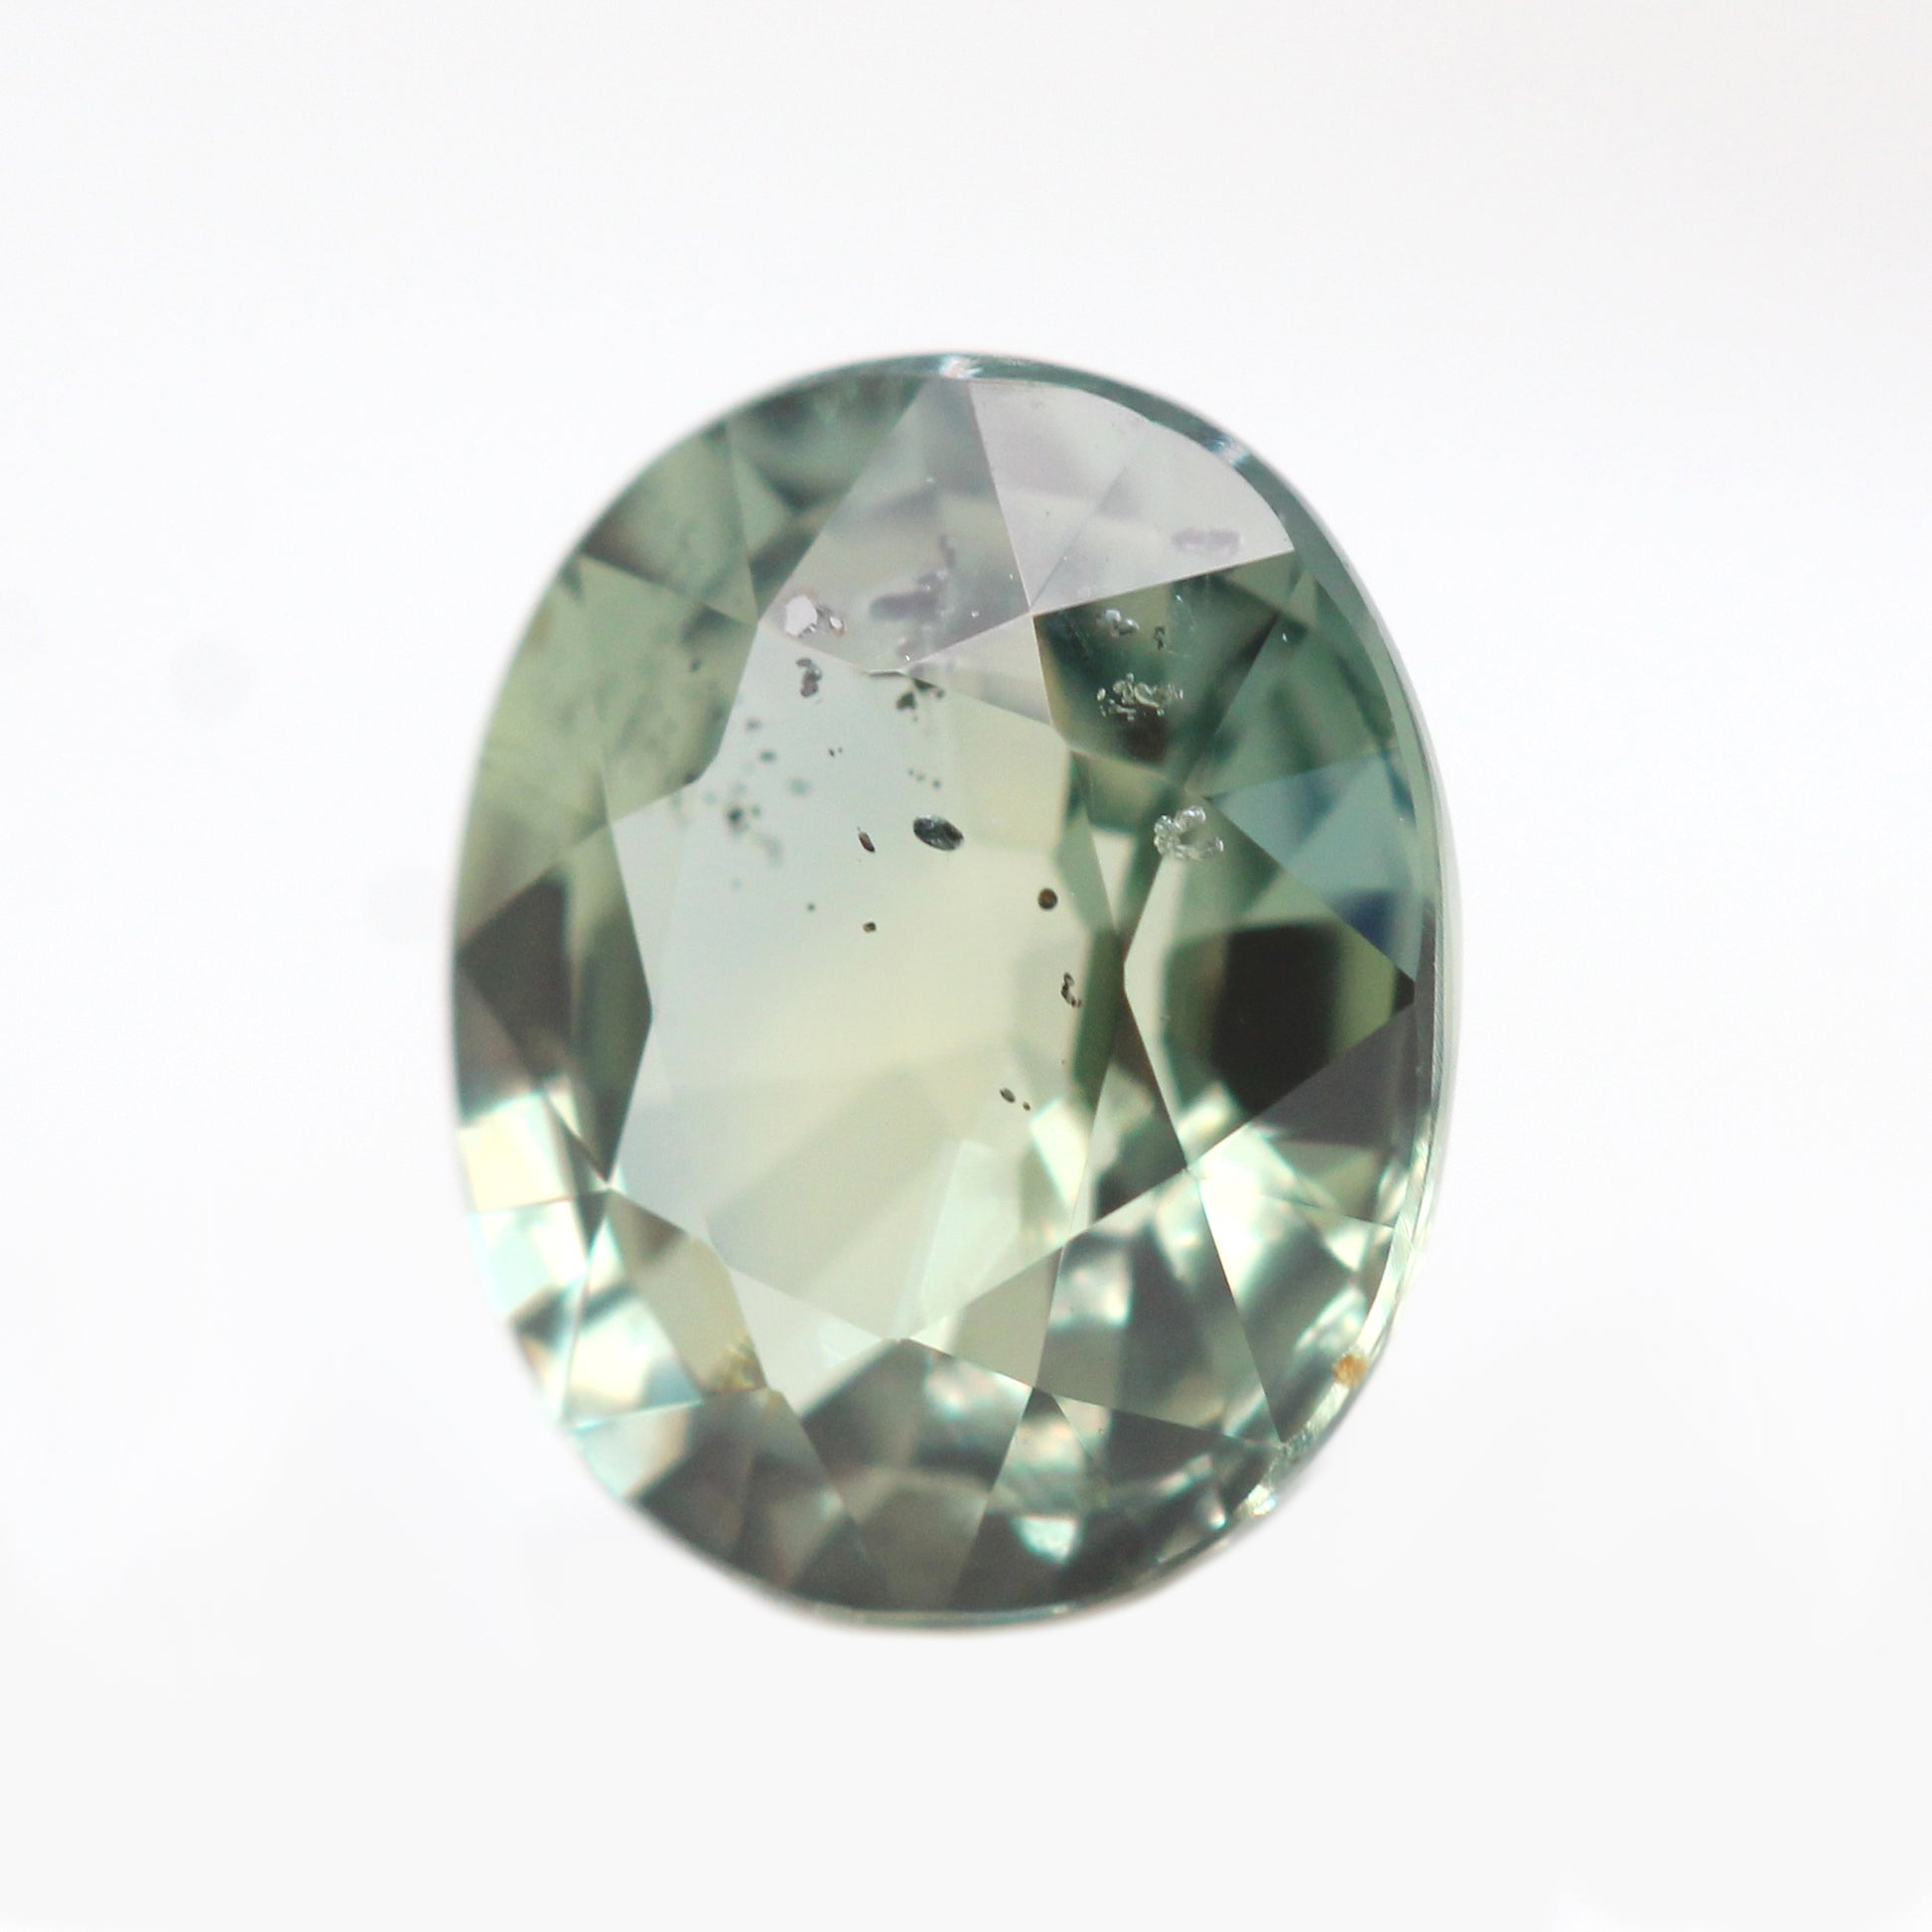 1.44 Carat Light Earthy Green Oval Sapphire for Custom Work - Inventory Code GOS144 - Midwinter Co. Alternative Bridal Rings and Modern Fine Jewelry